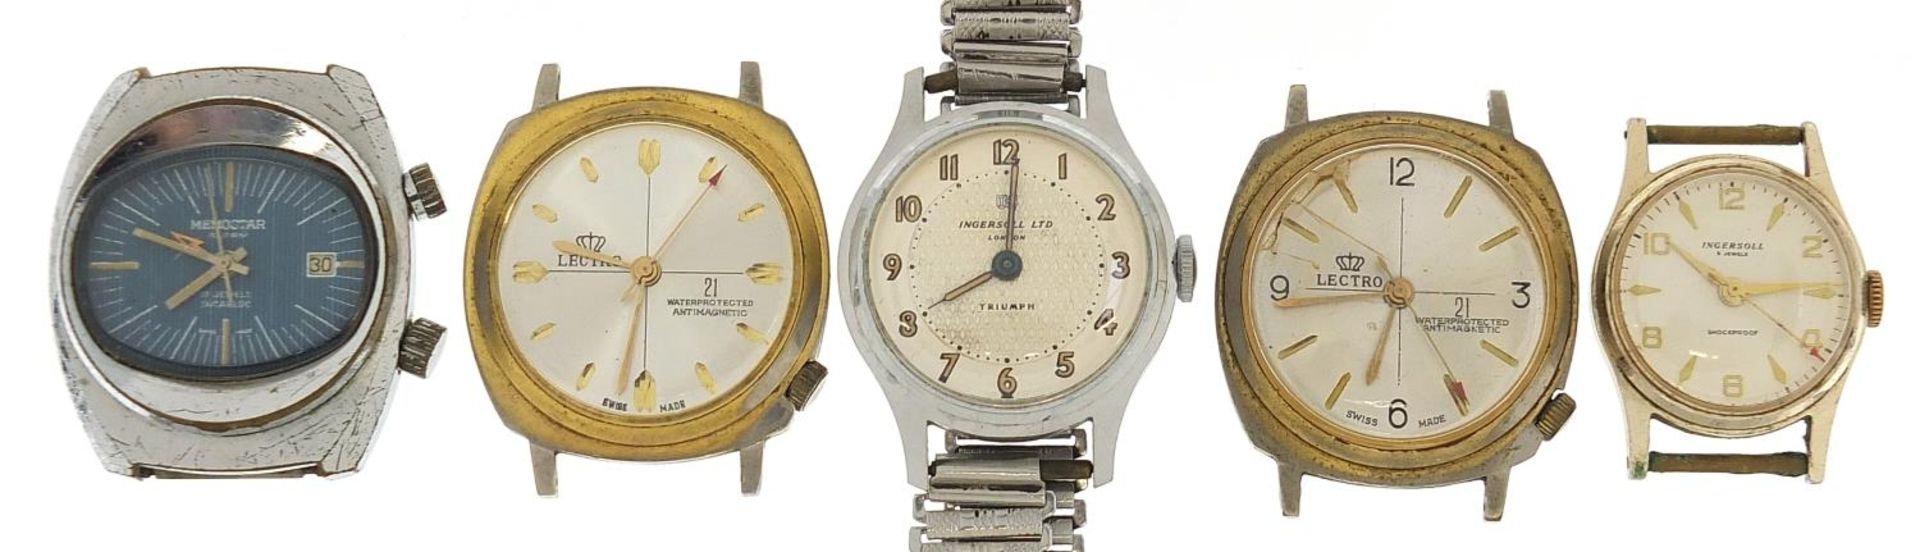 Five vintage wristwatches including Ingersoll Triumph, Memostar alarm, Lectro and Ingersoll